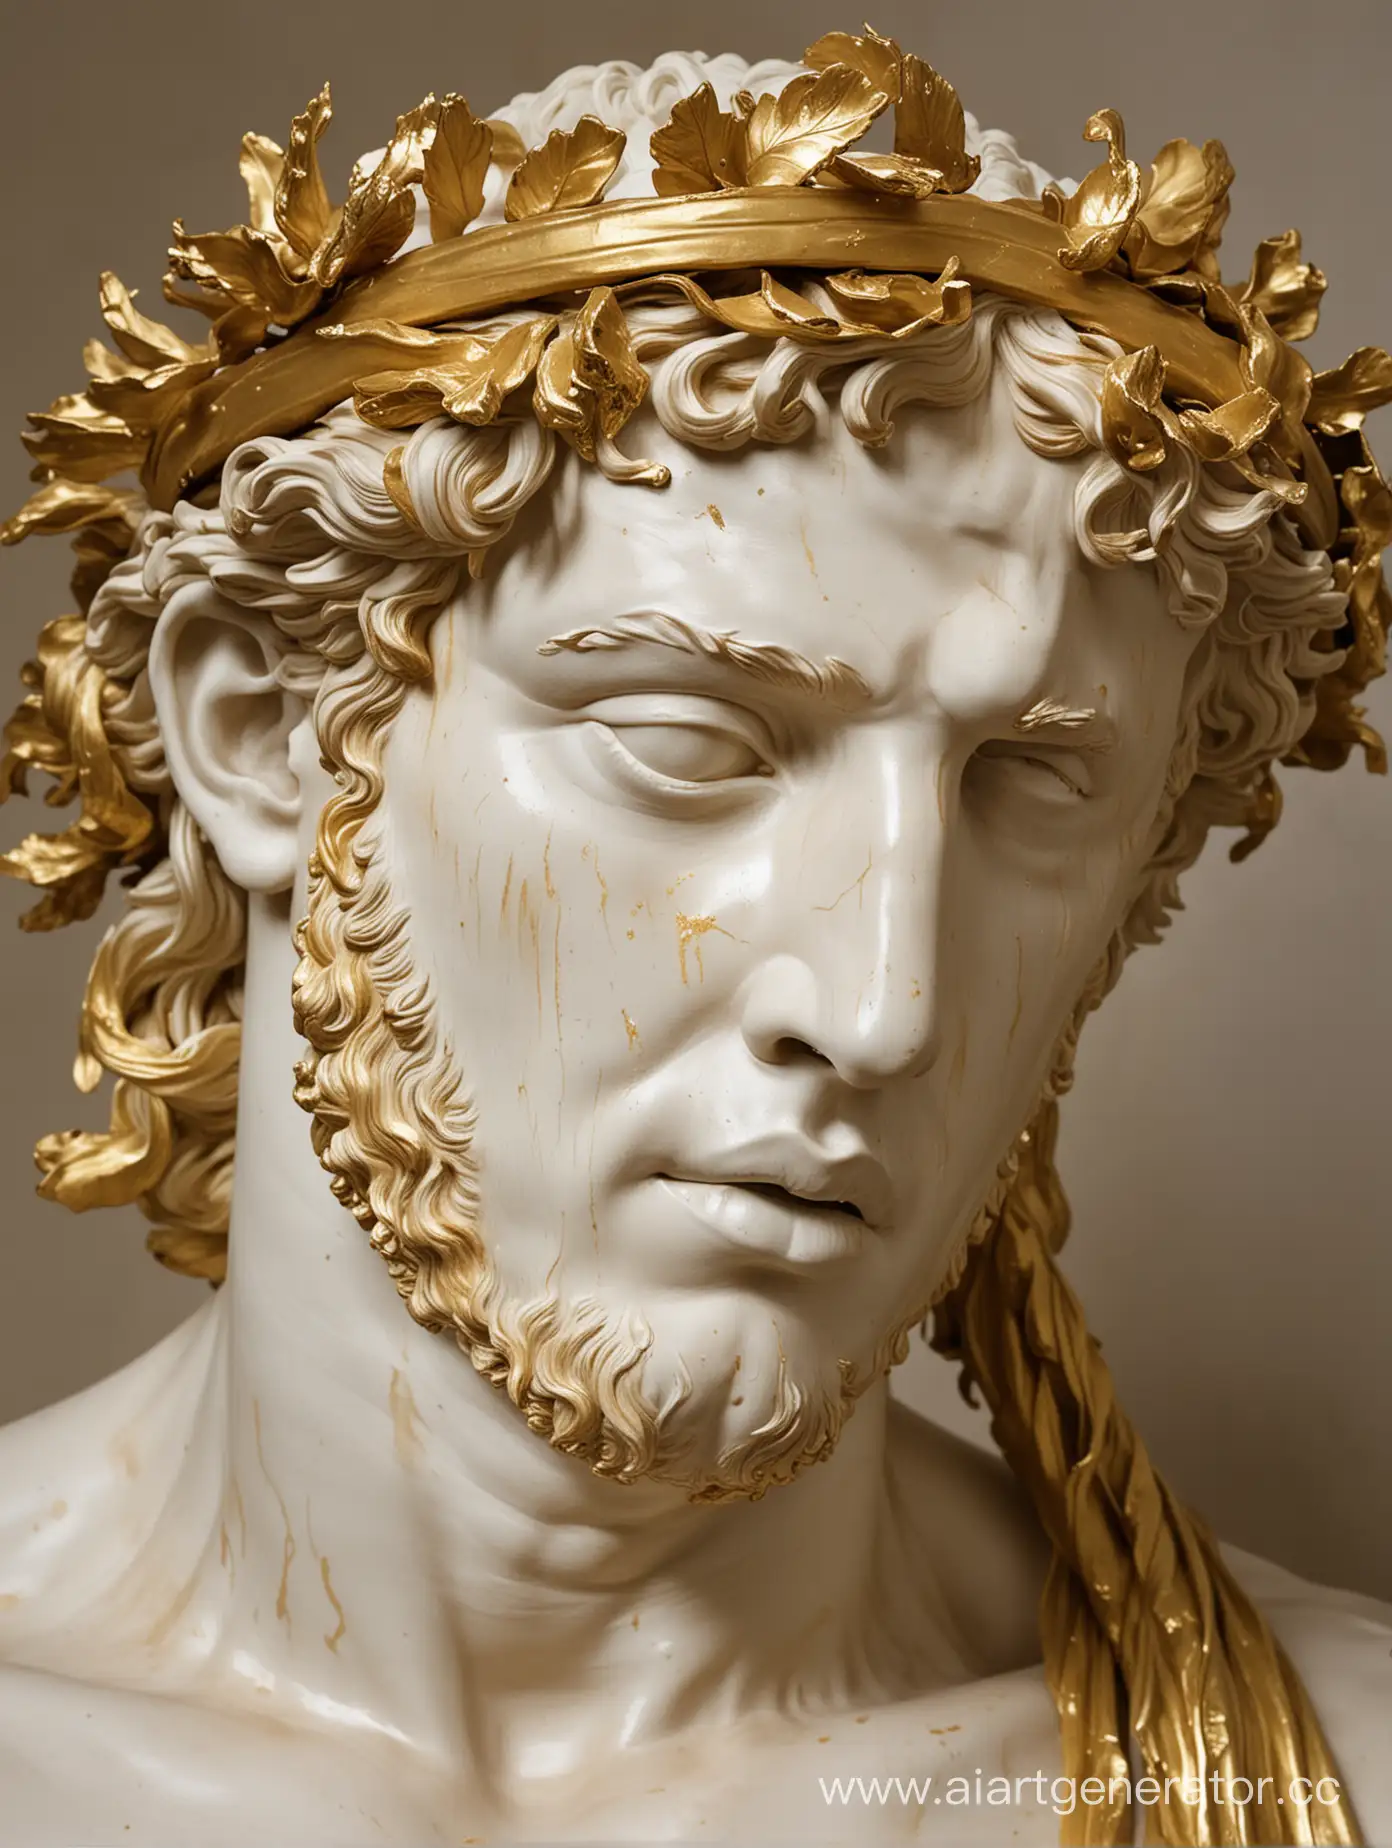 Dionysus-Statue-with-Golden-Hair-Dripping-onto-Face